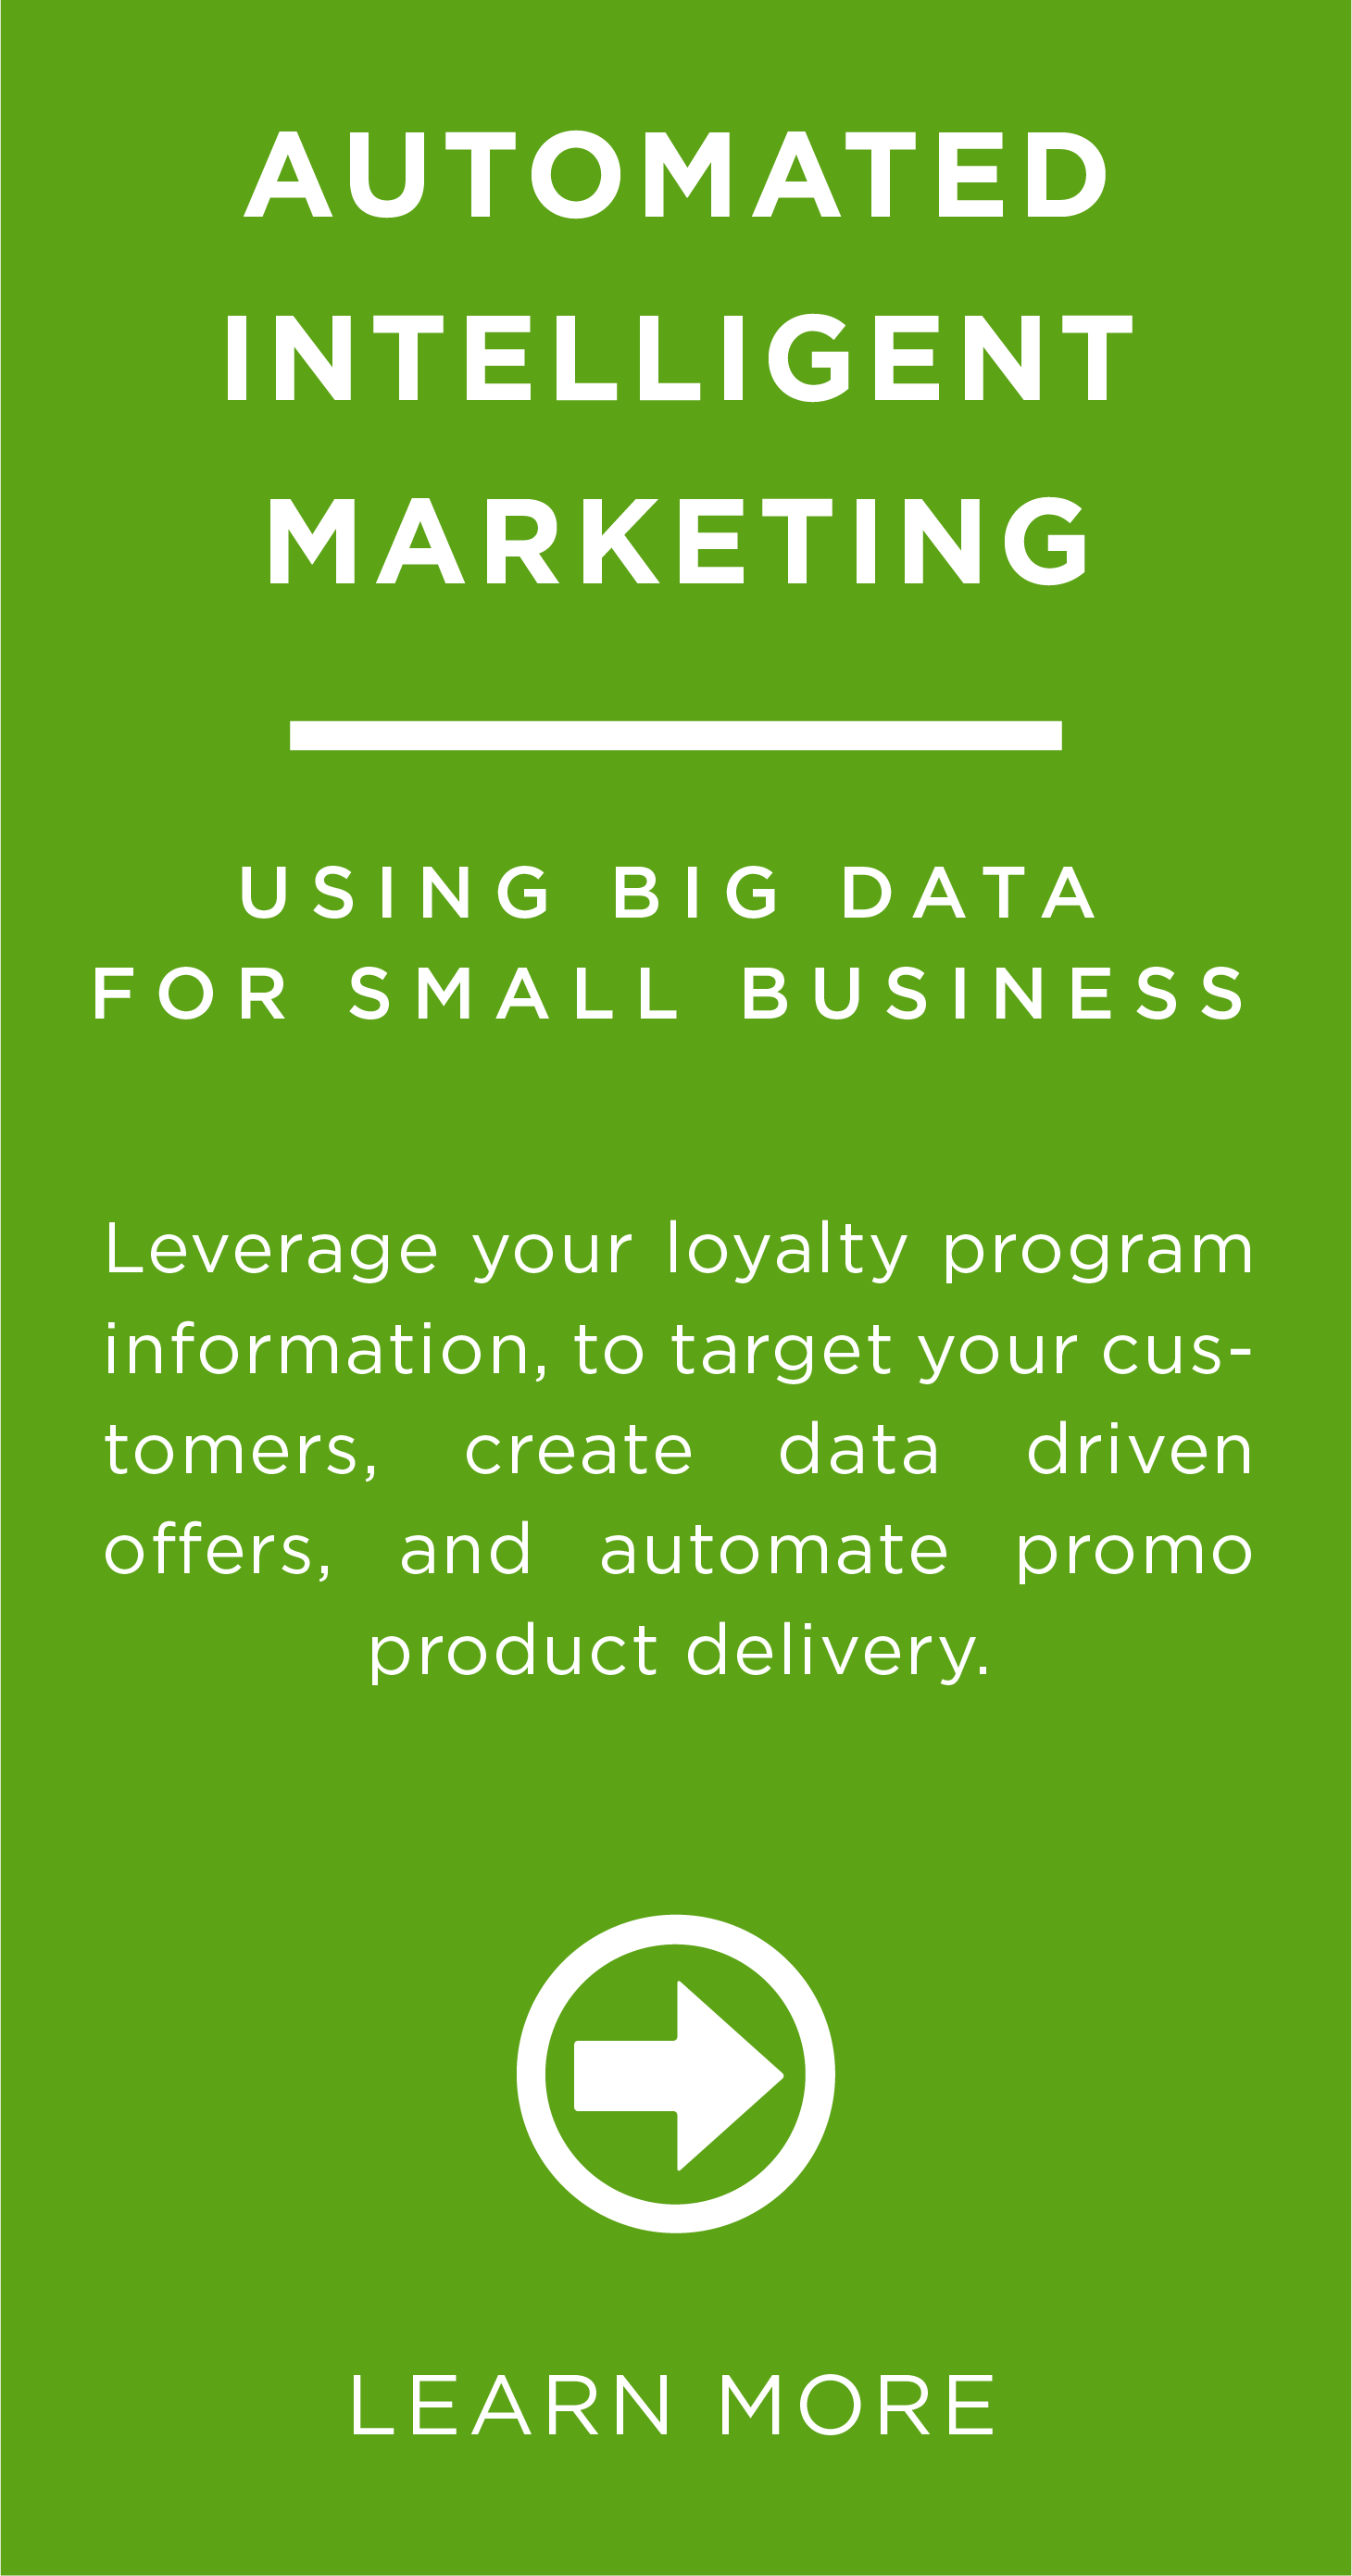 <h2>Automated Intelligent Marketing</h2> <p>Leverage your loyalty program information, to target your customers, create data driven offers, and automate promo product delivery</p>